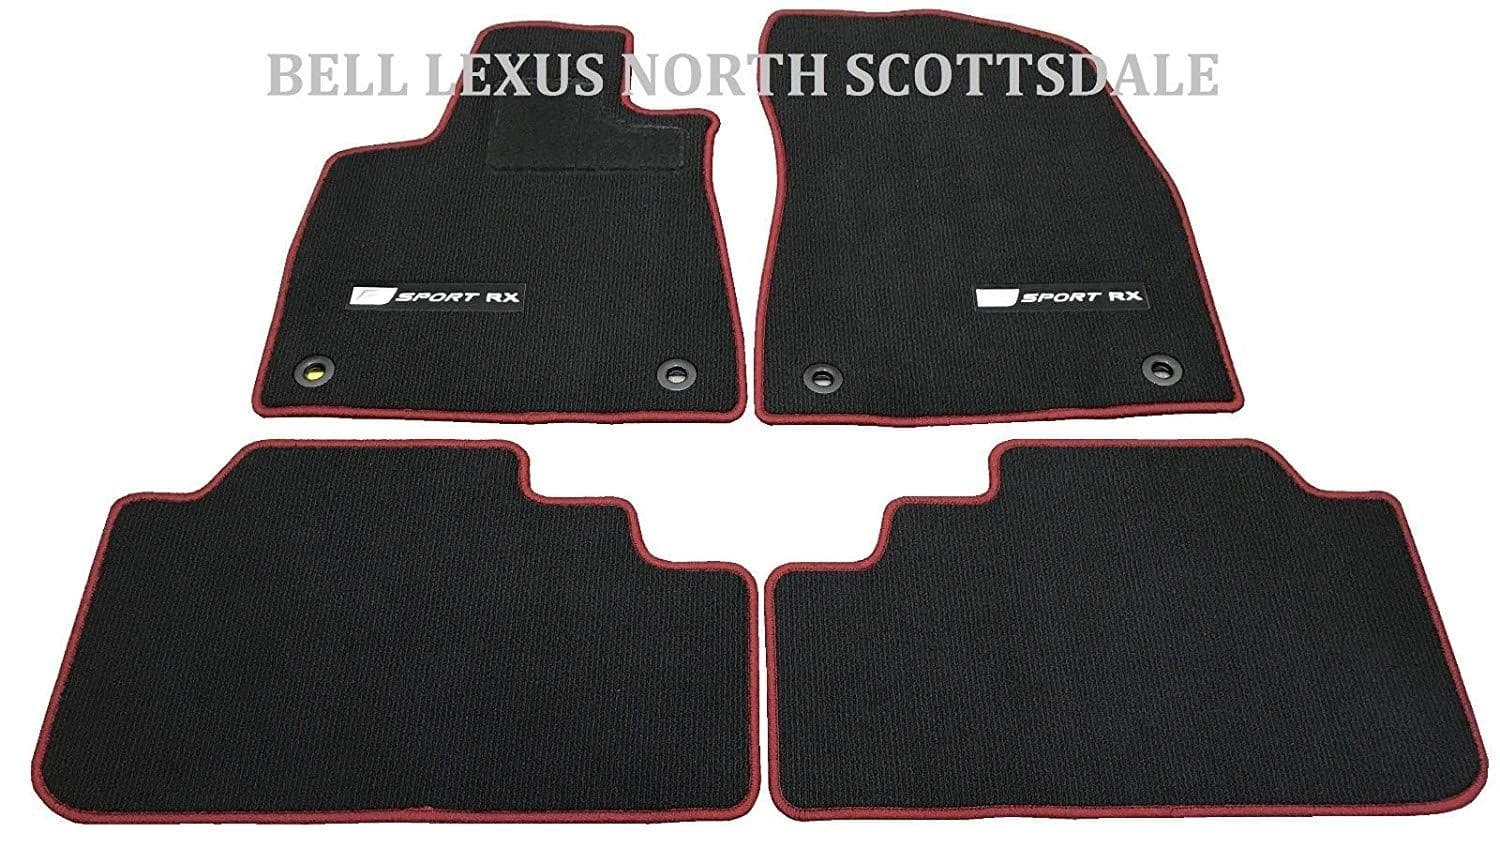 Interior/Upholstery - SOCAL*Like New OEM Rioja Red FSPORT Floor Mats - Used - 2016 to 2019 Lexus RX350 - Monterey Park, CA 91755, United States